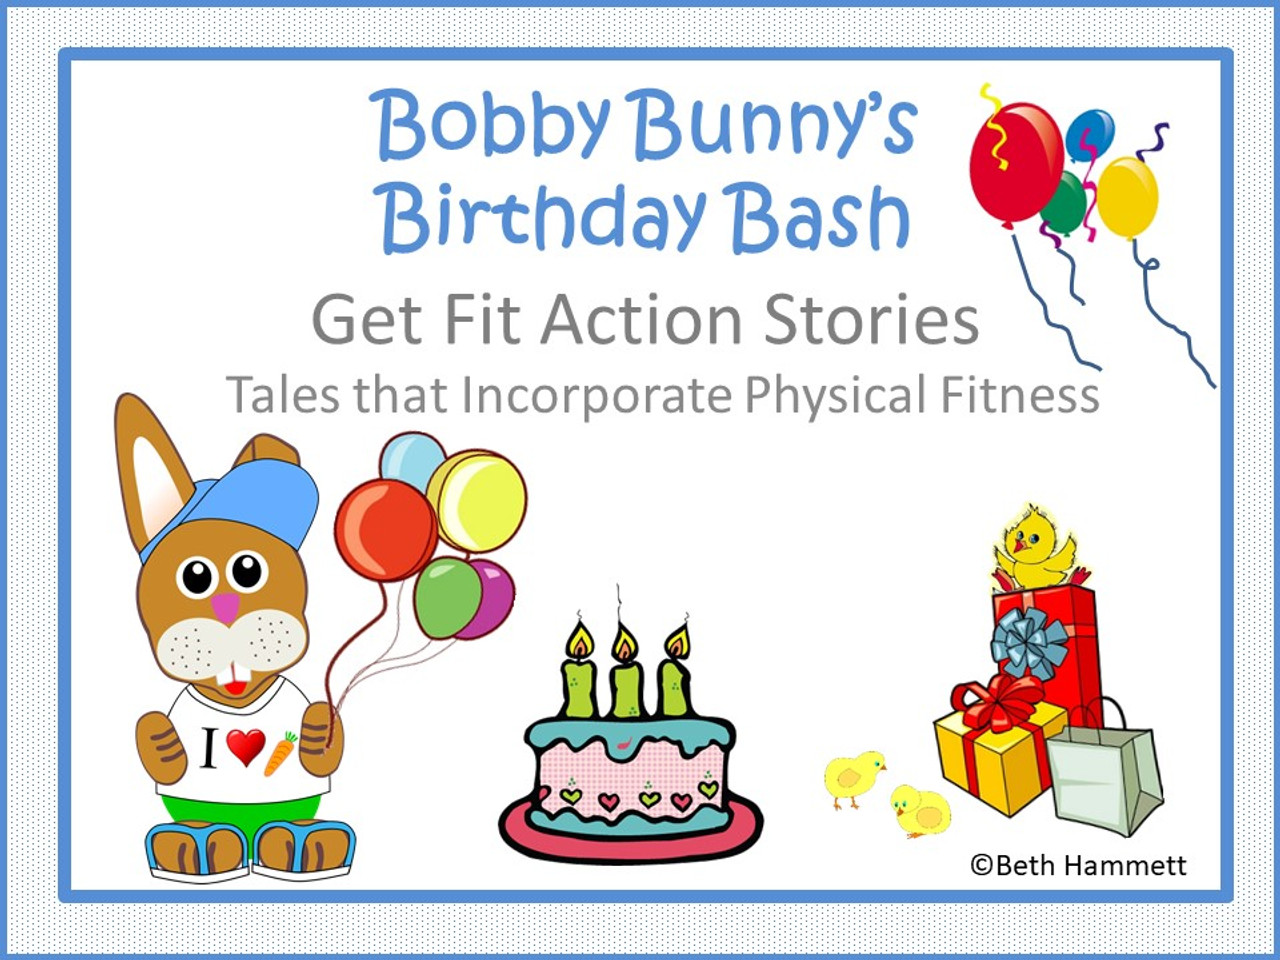 Get Fit Action Stories: Bobby Bunny's Birthday Bash